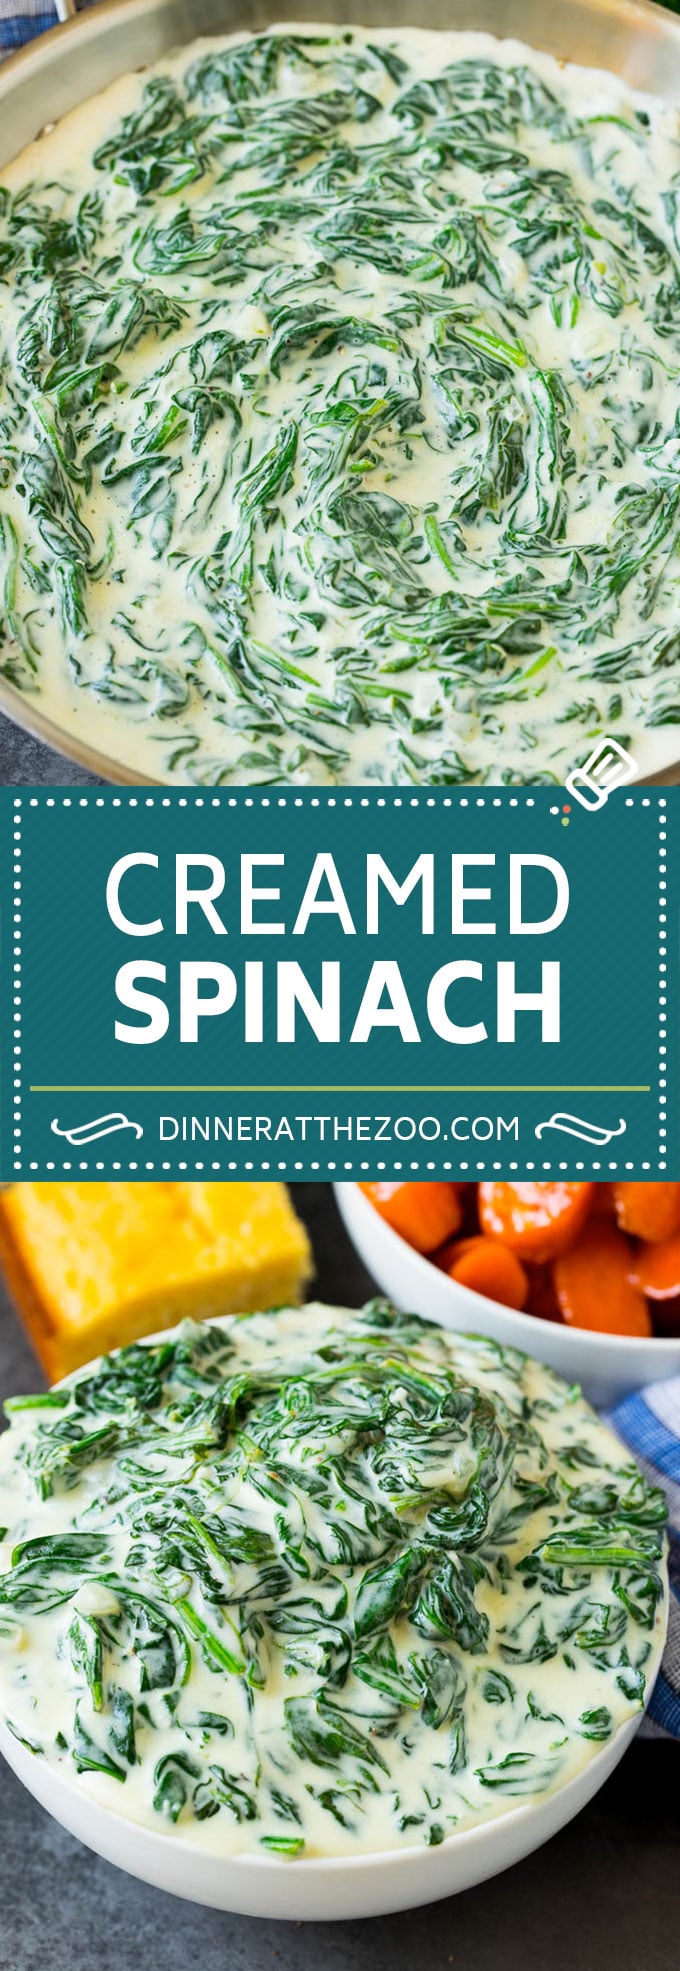 This creamed spinach is fresh sauteed spinach leaves in a flavorful cream sauce with parmesan cheese.